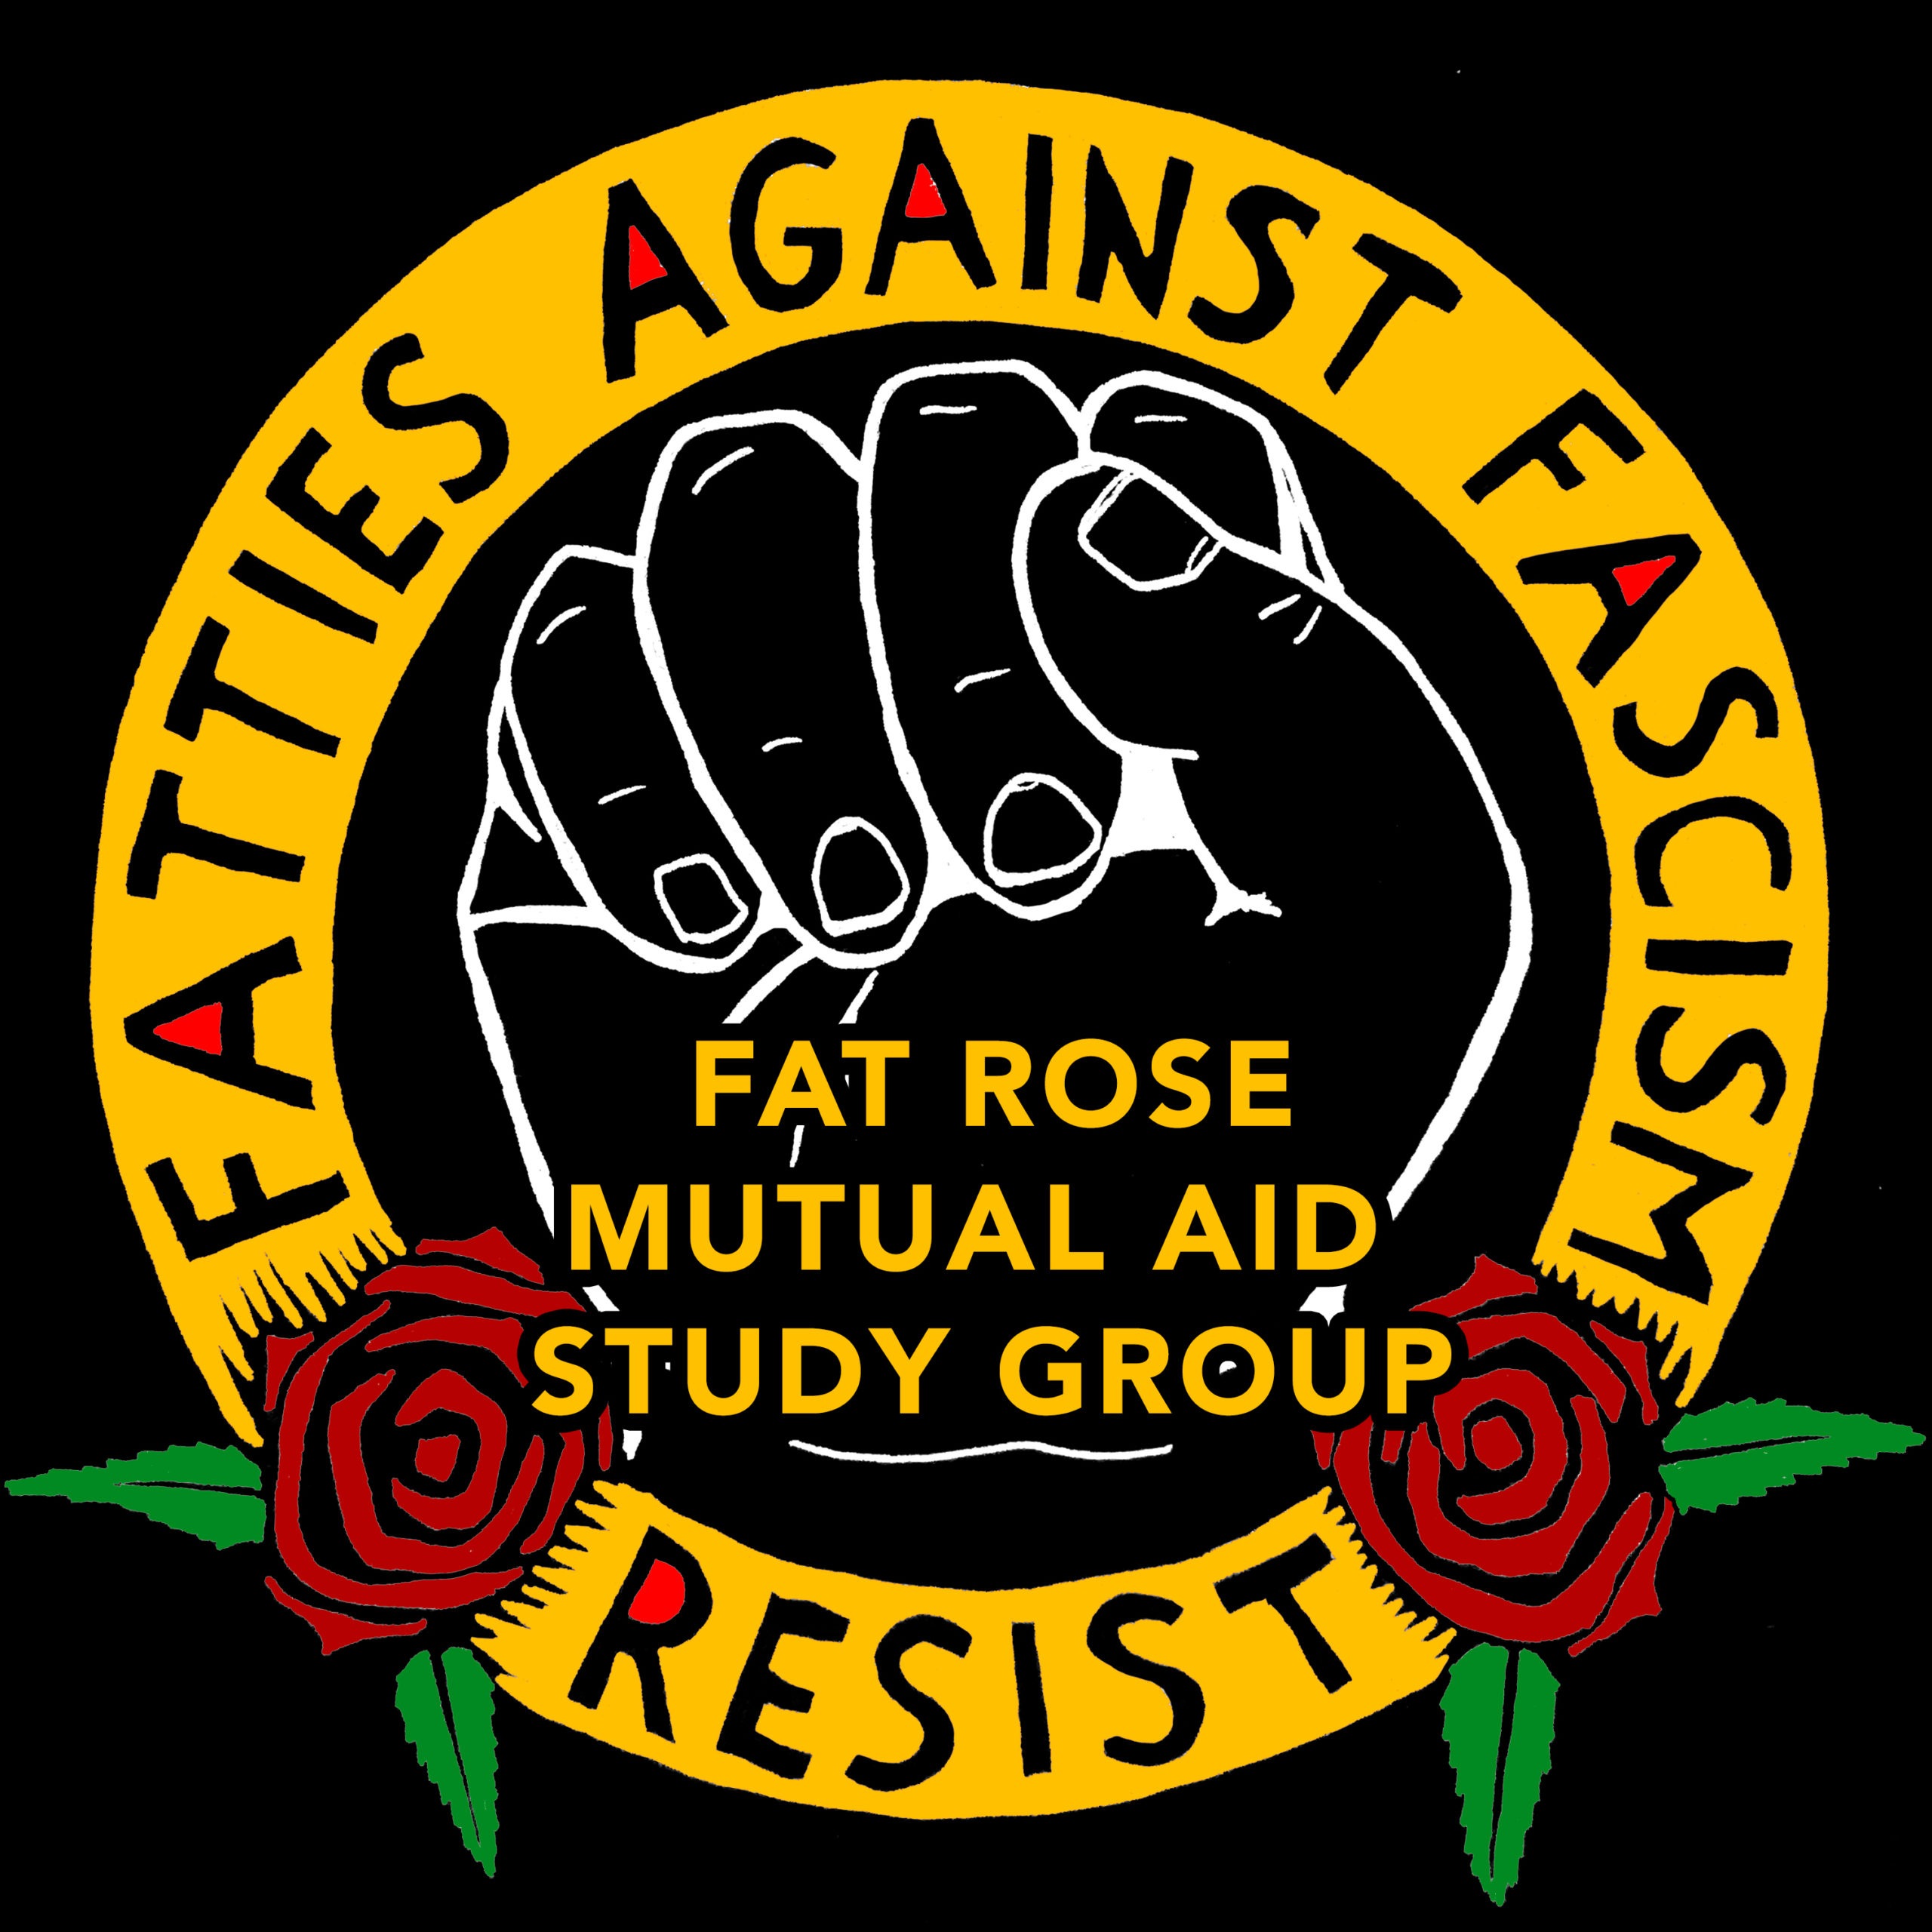 Fat Rose Mutual Aid Study Group